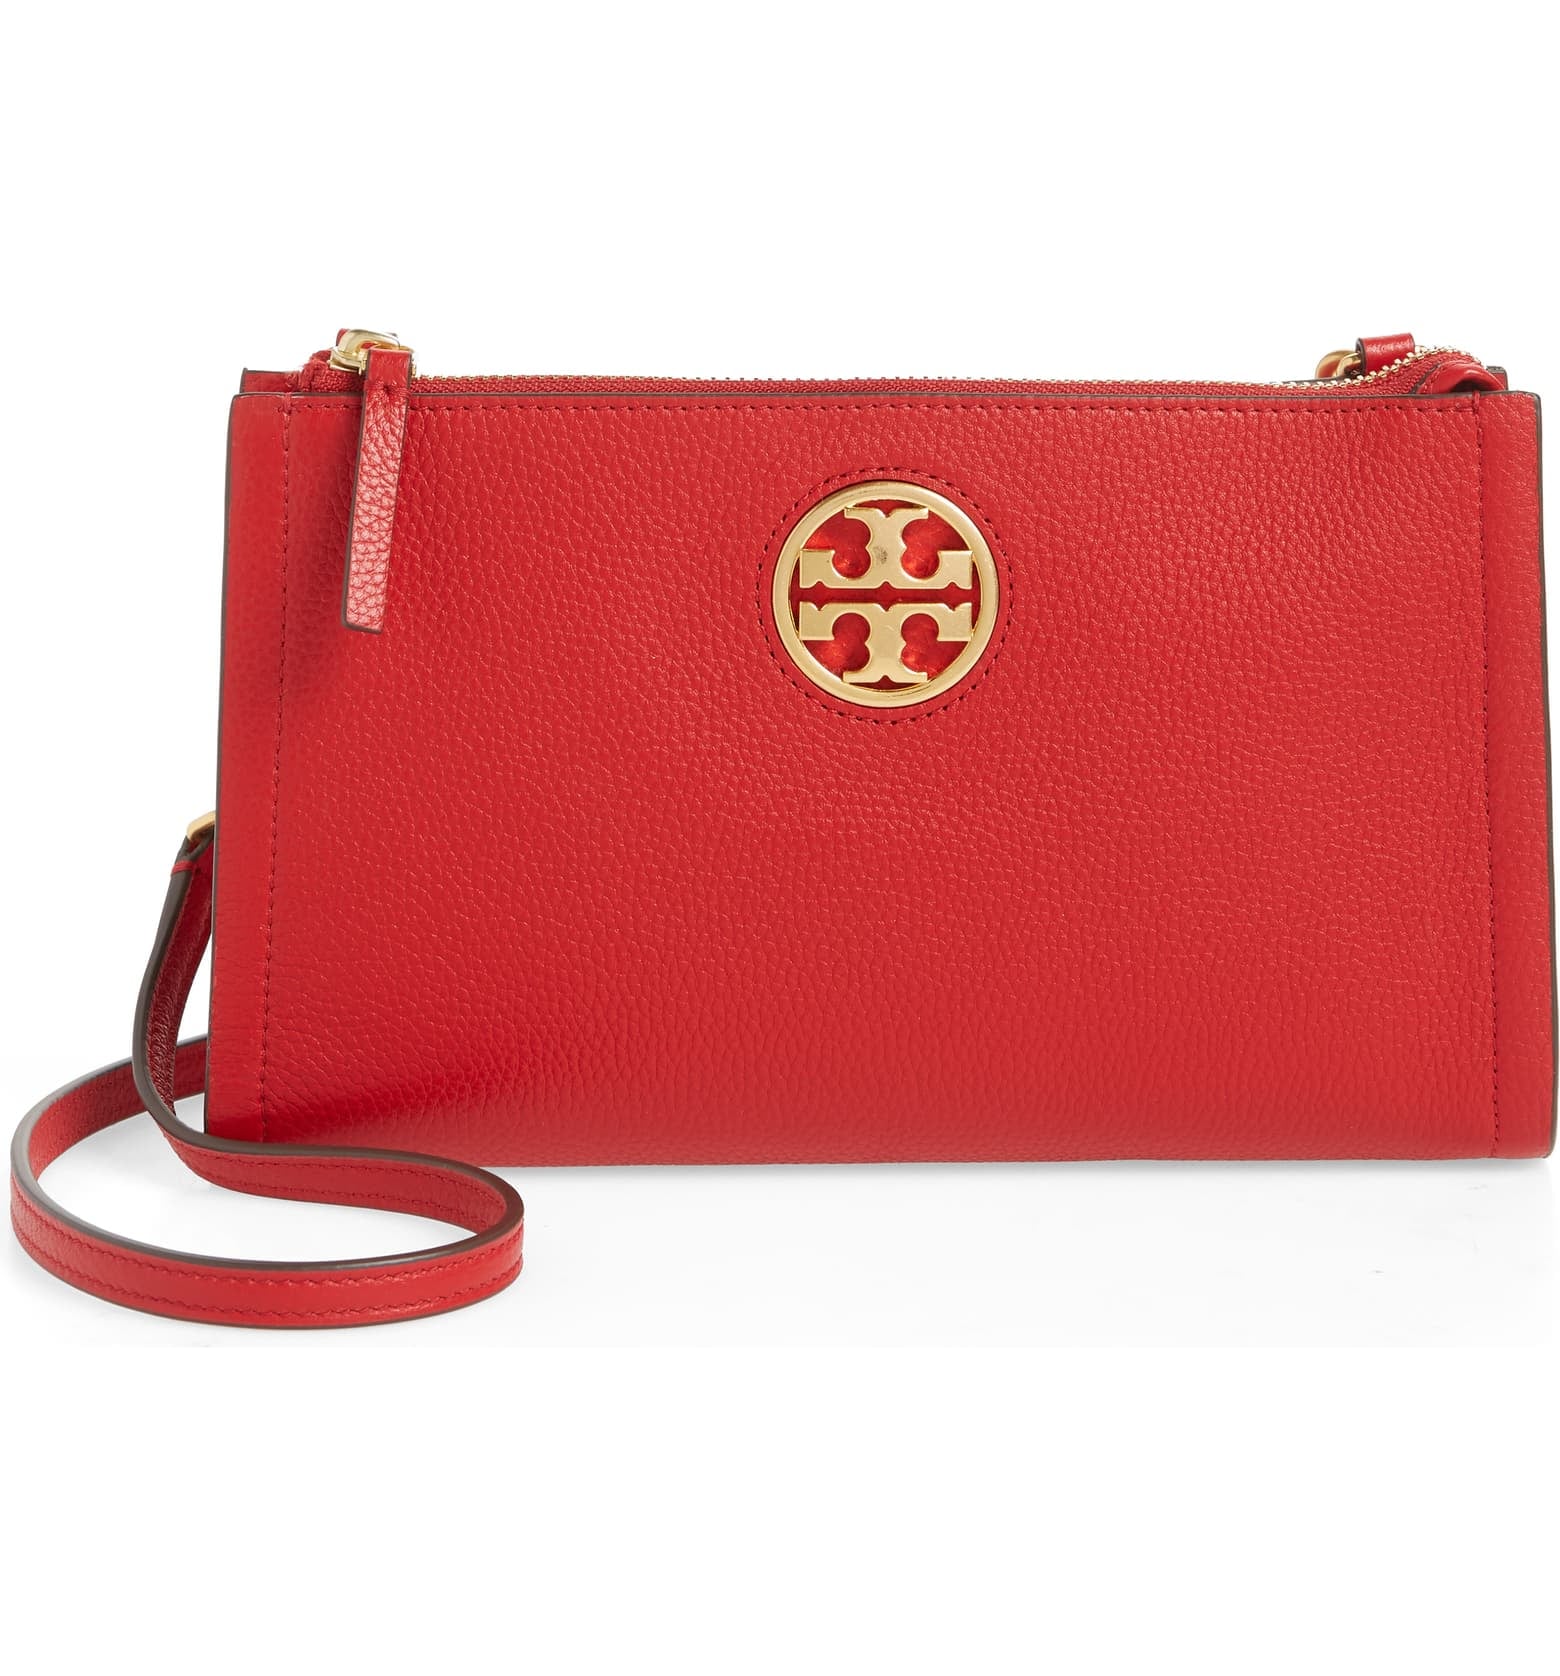 Tory Burch Sale Crossbody Bags Outlets Online, Save 47% | jlcatj.gob.mx